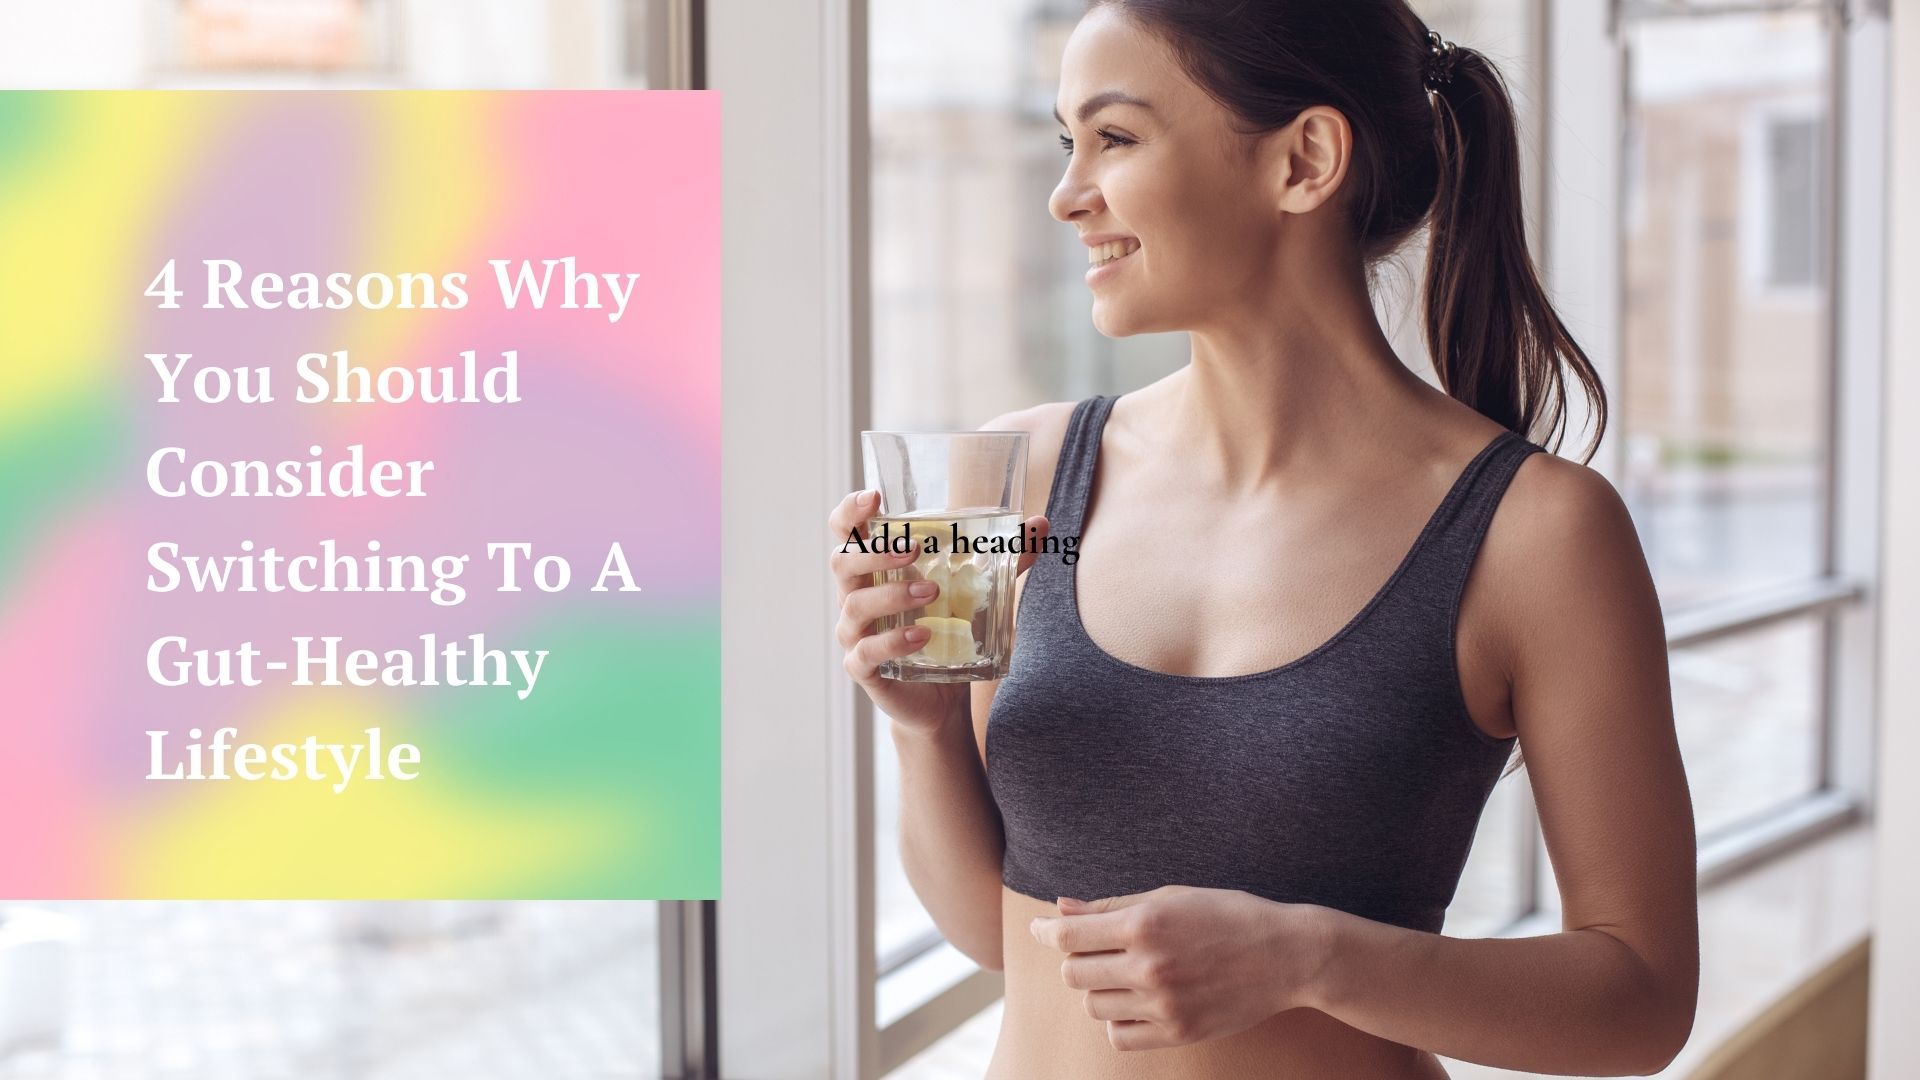 4 Reasons Why You Should Consider Switching To A Gut-Healthy Lifestyle